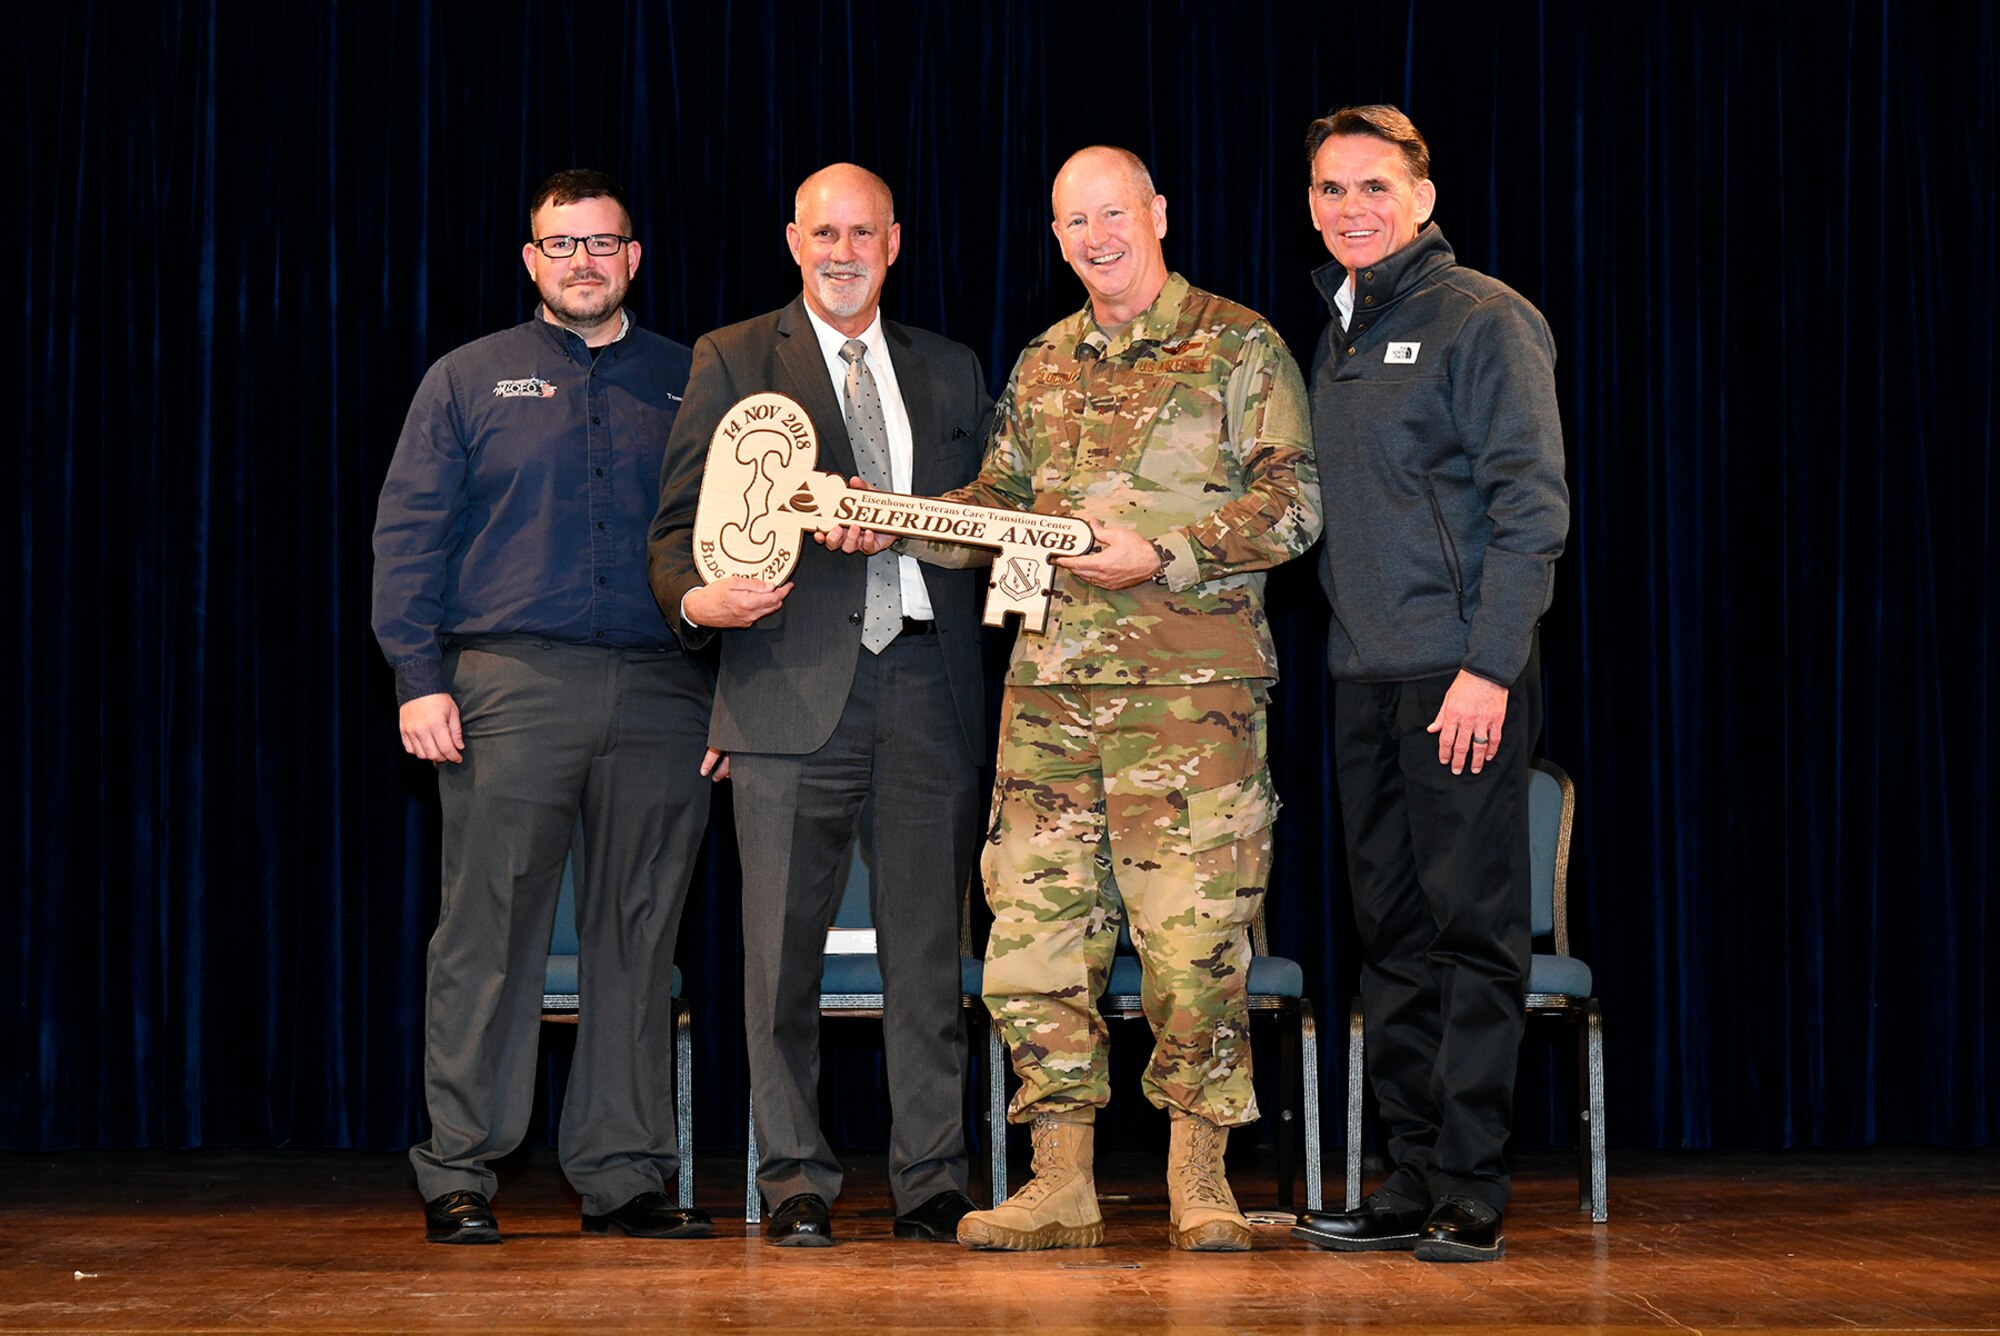 Tom Jones, a former Eisenhower patient, Brig. Gen. John D. Slocum, commander of Selfridge Air National Guard Base, John Cornack, C.E.O. of the Eisenhower Center and Mark Hackel, Macomb County Executive, celebrate the ceremonial key-passing during a ceremony here on November 14, 2018. The “Eisenhower Veteran Care Transition Center” will provide a residential rehabilitation and reintegration program, ultimately capable of servicing 42 veteran patients suffering from service-related conditions, specifically post-traumatic stress disorder, mild-to-moderate traumatic brain injury or chronic traumatic encephalopathy.